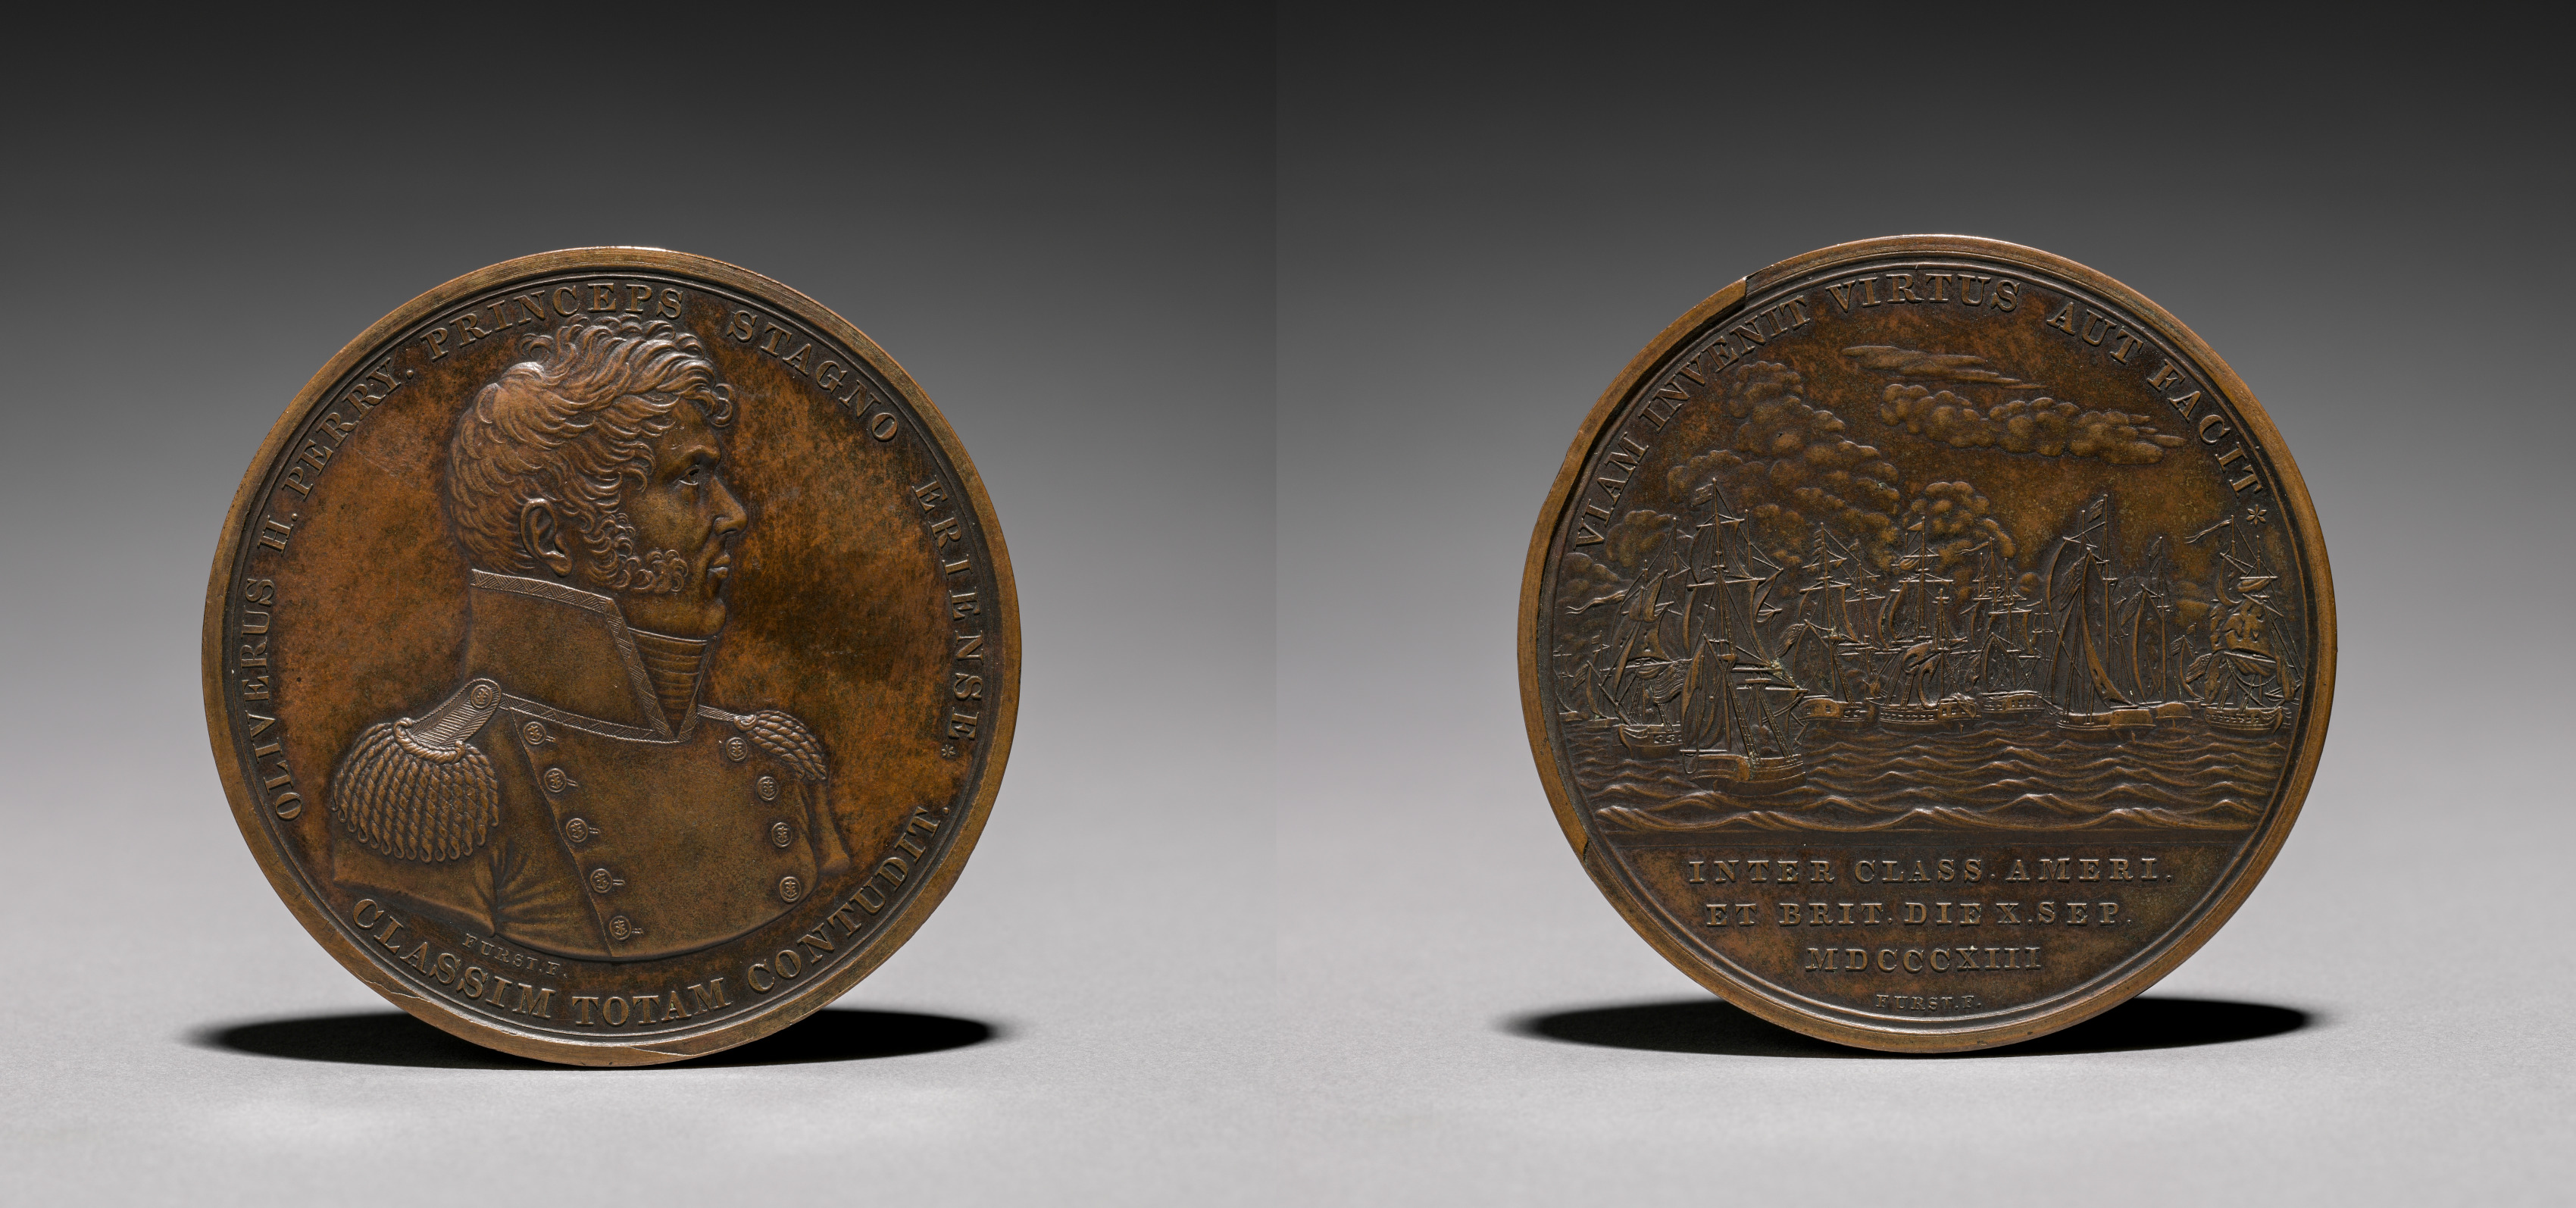 Medal Commemorating Commodore Oliver Hazard Perry (1785-1819) and the Battle of Lake Erie